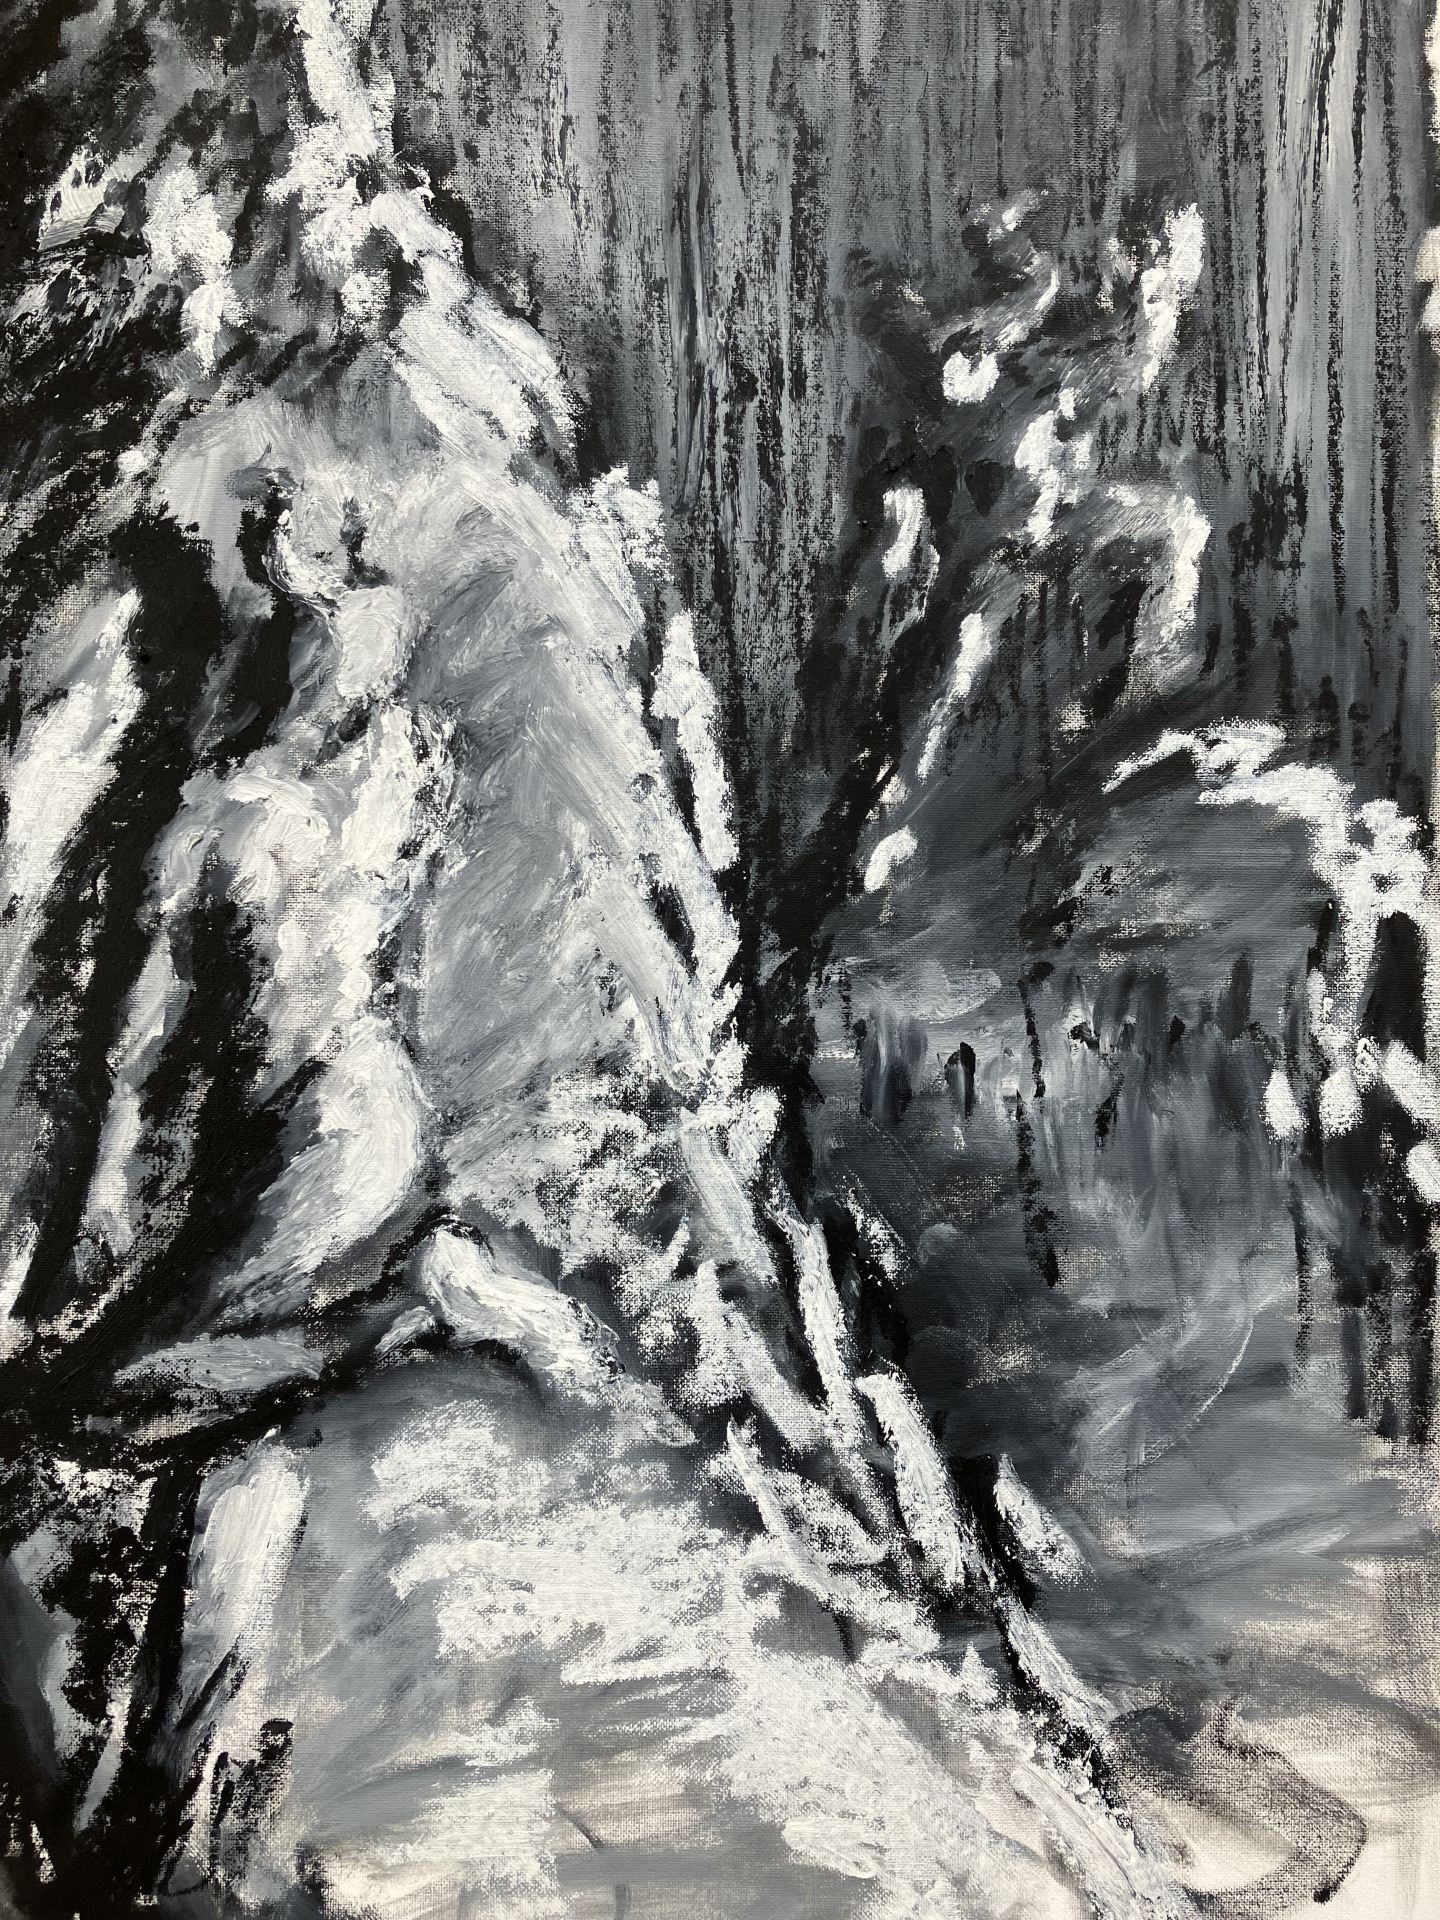 A black and white painting showing two figures in a cave-like environment.